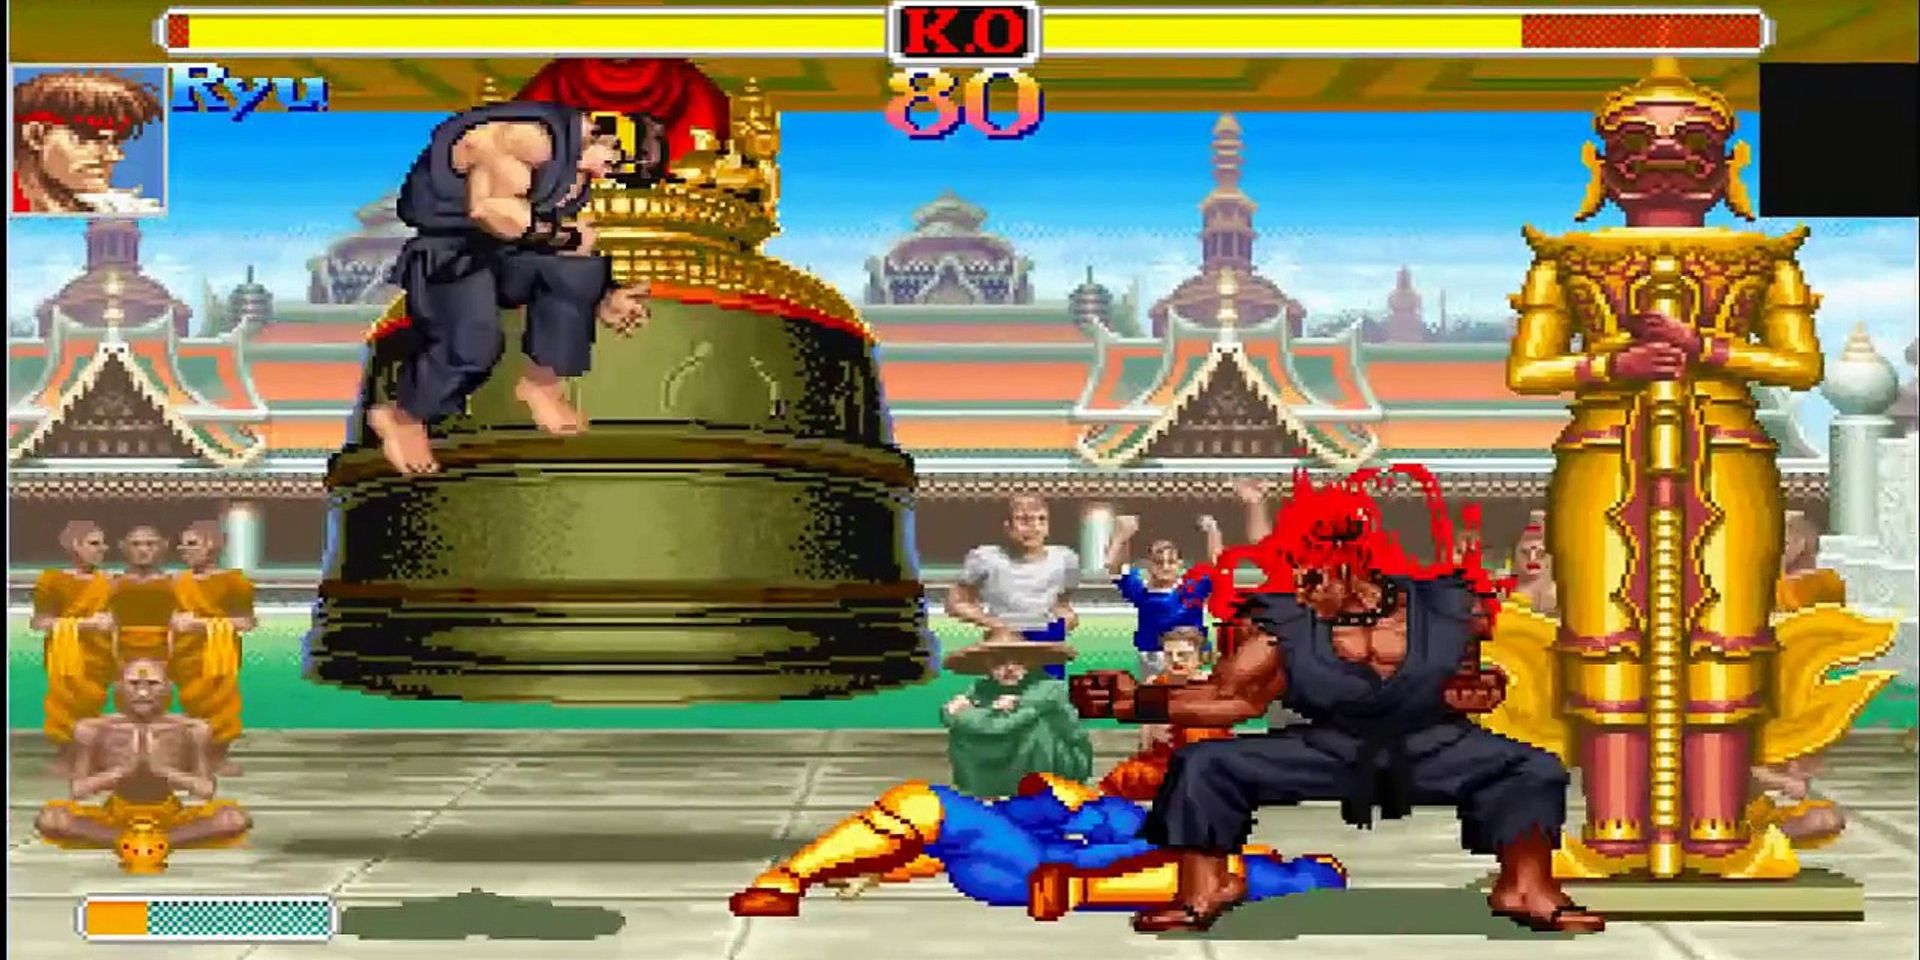 Ryu fights the secret boss Akuma in Super Street Fighter II Turbo with M. Bison knocked out.